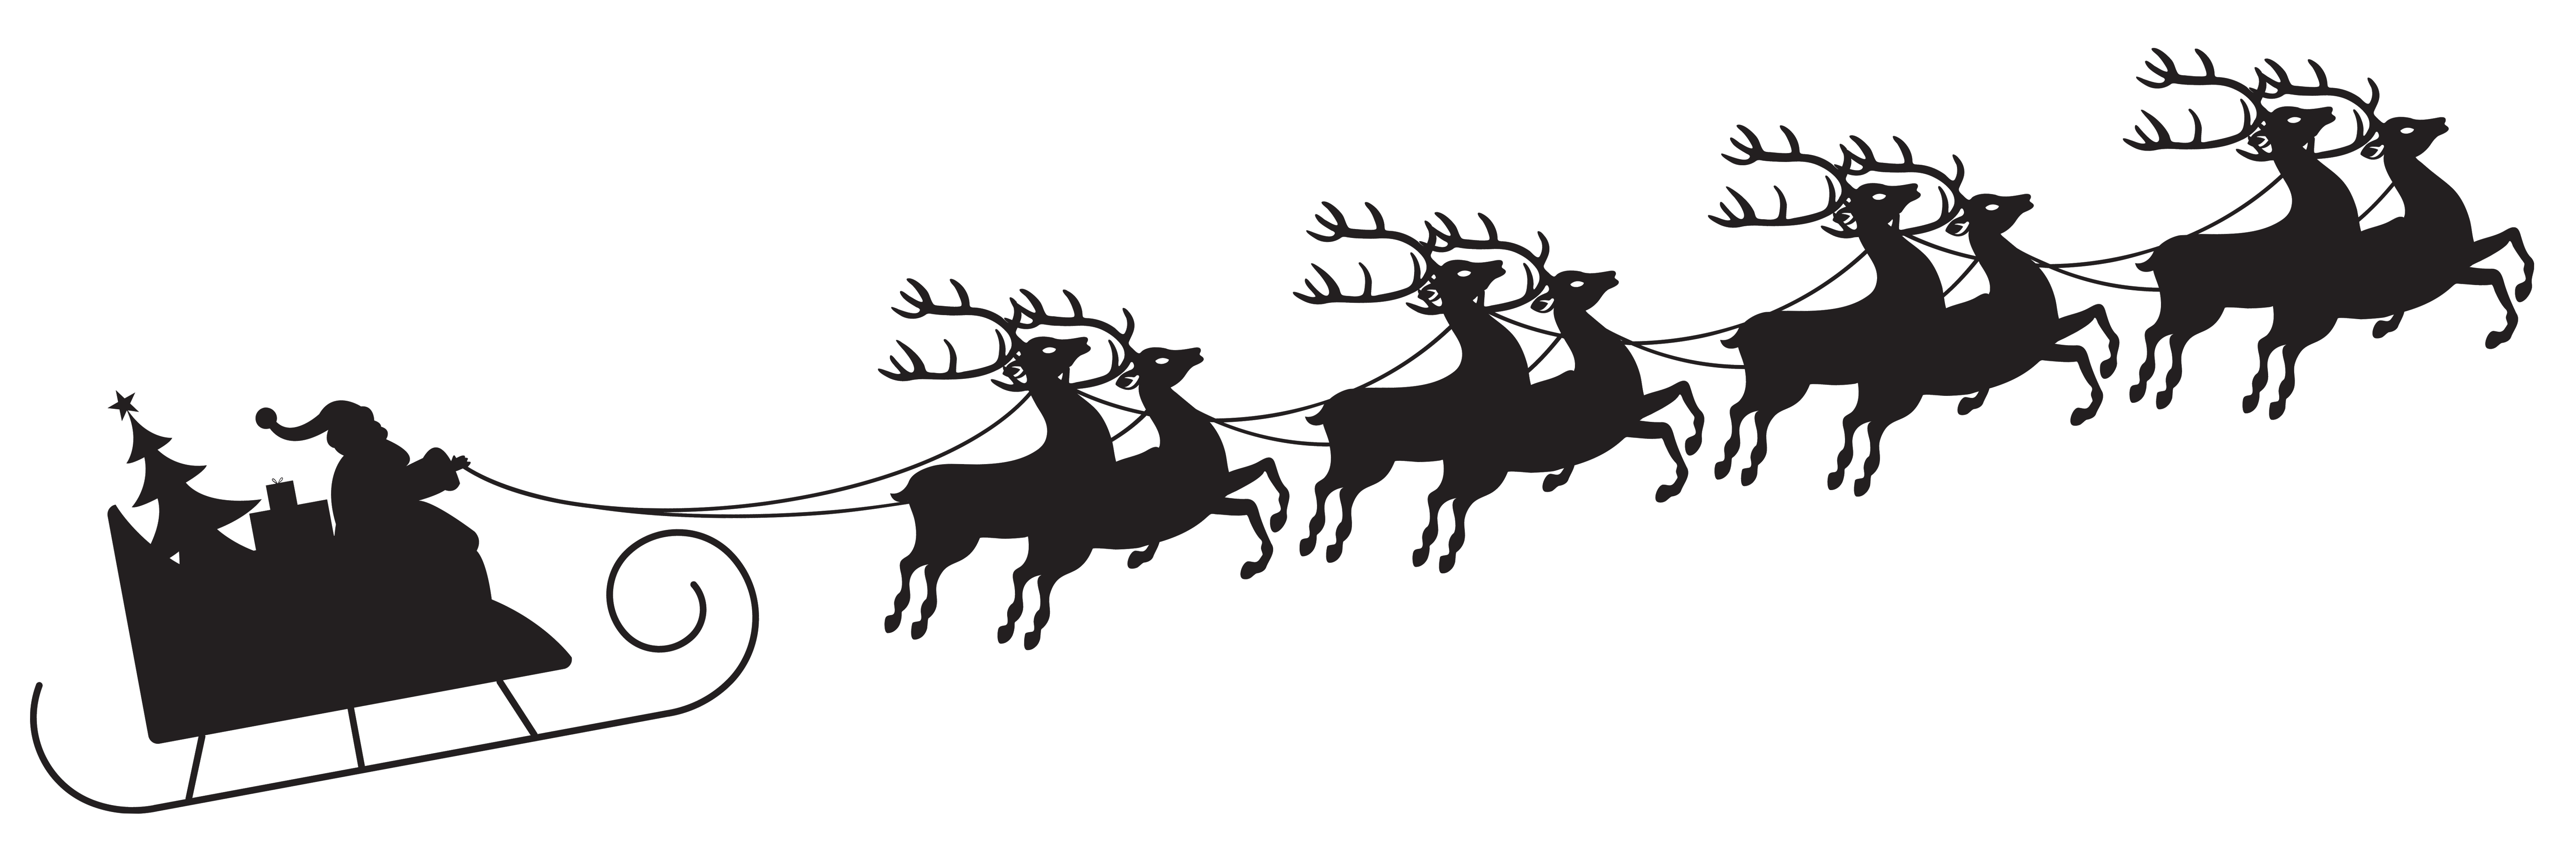 Deer clipart shadow. Silhouette of horse drawn